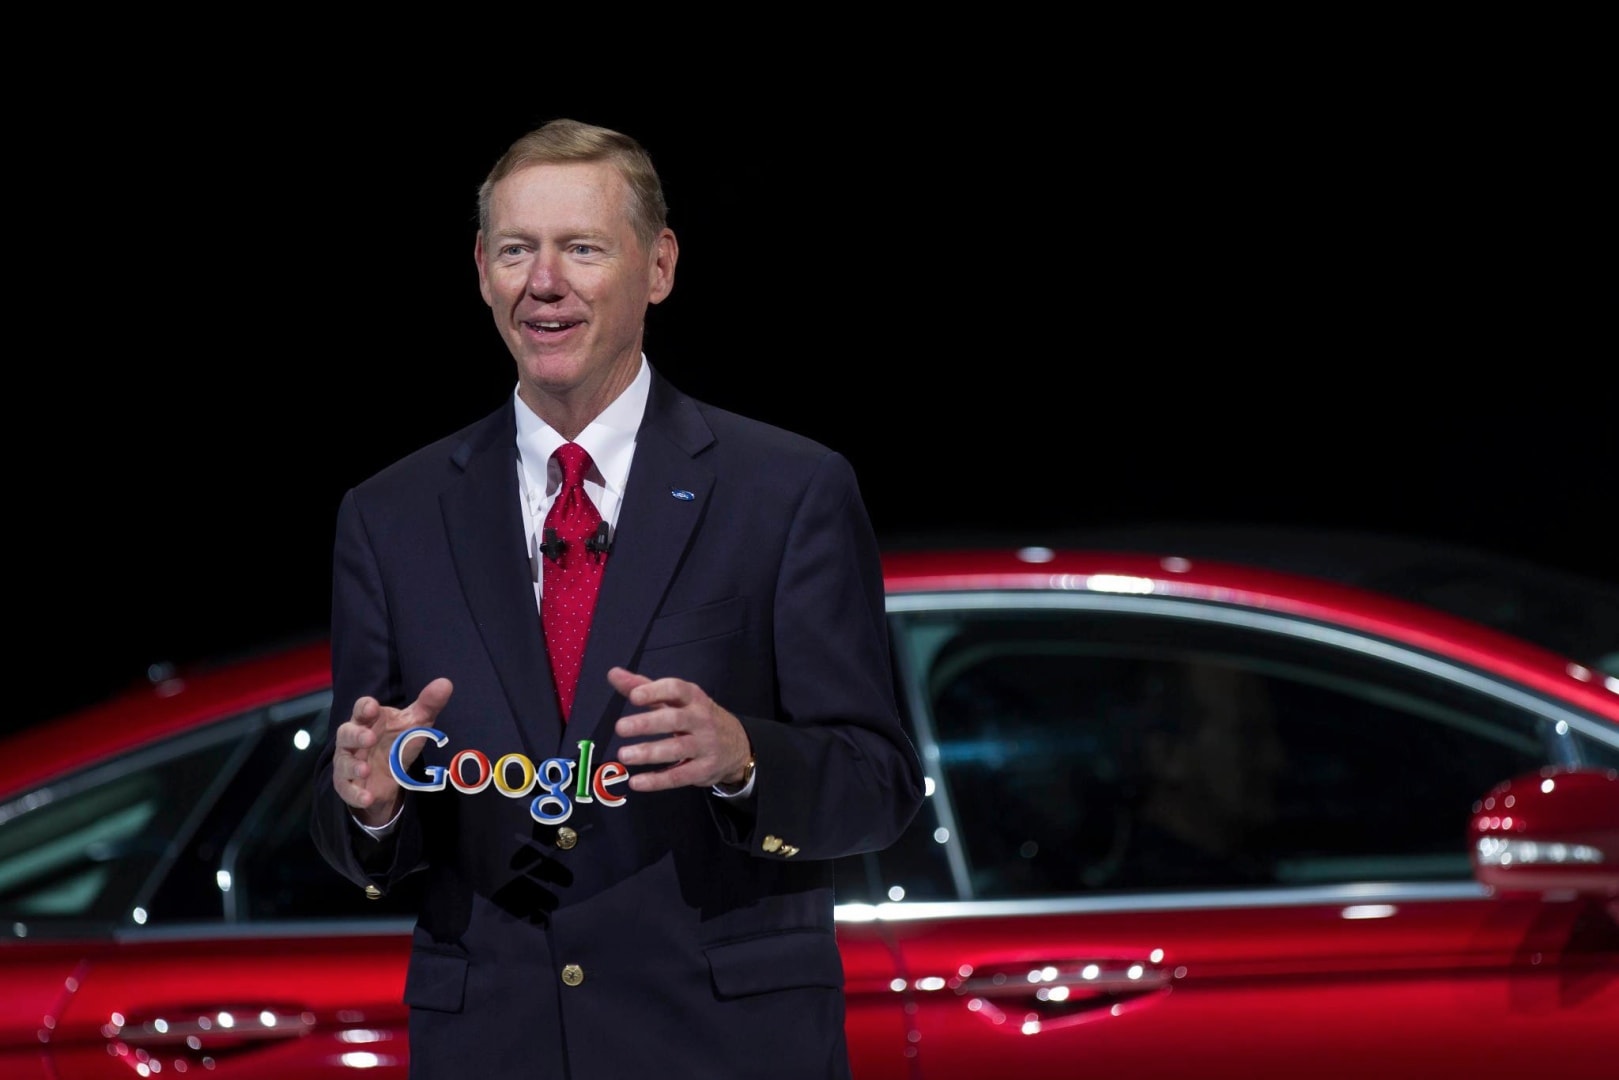 Former Ford CEO Alan Mulally Joins Google Board of Directors